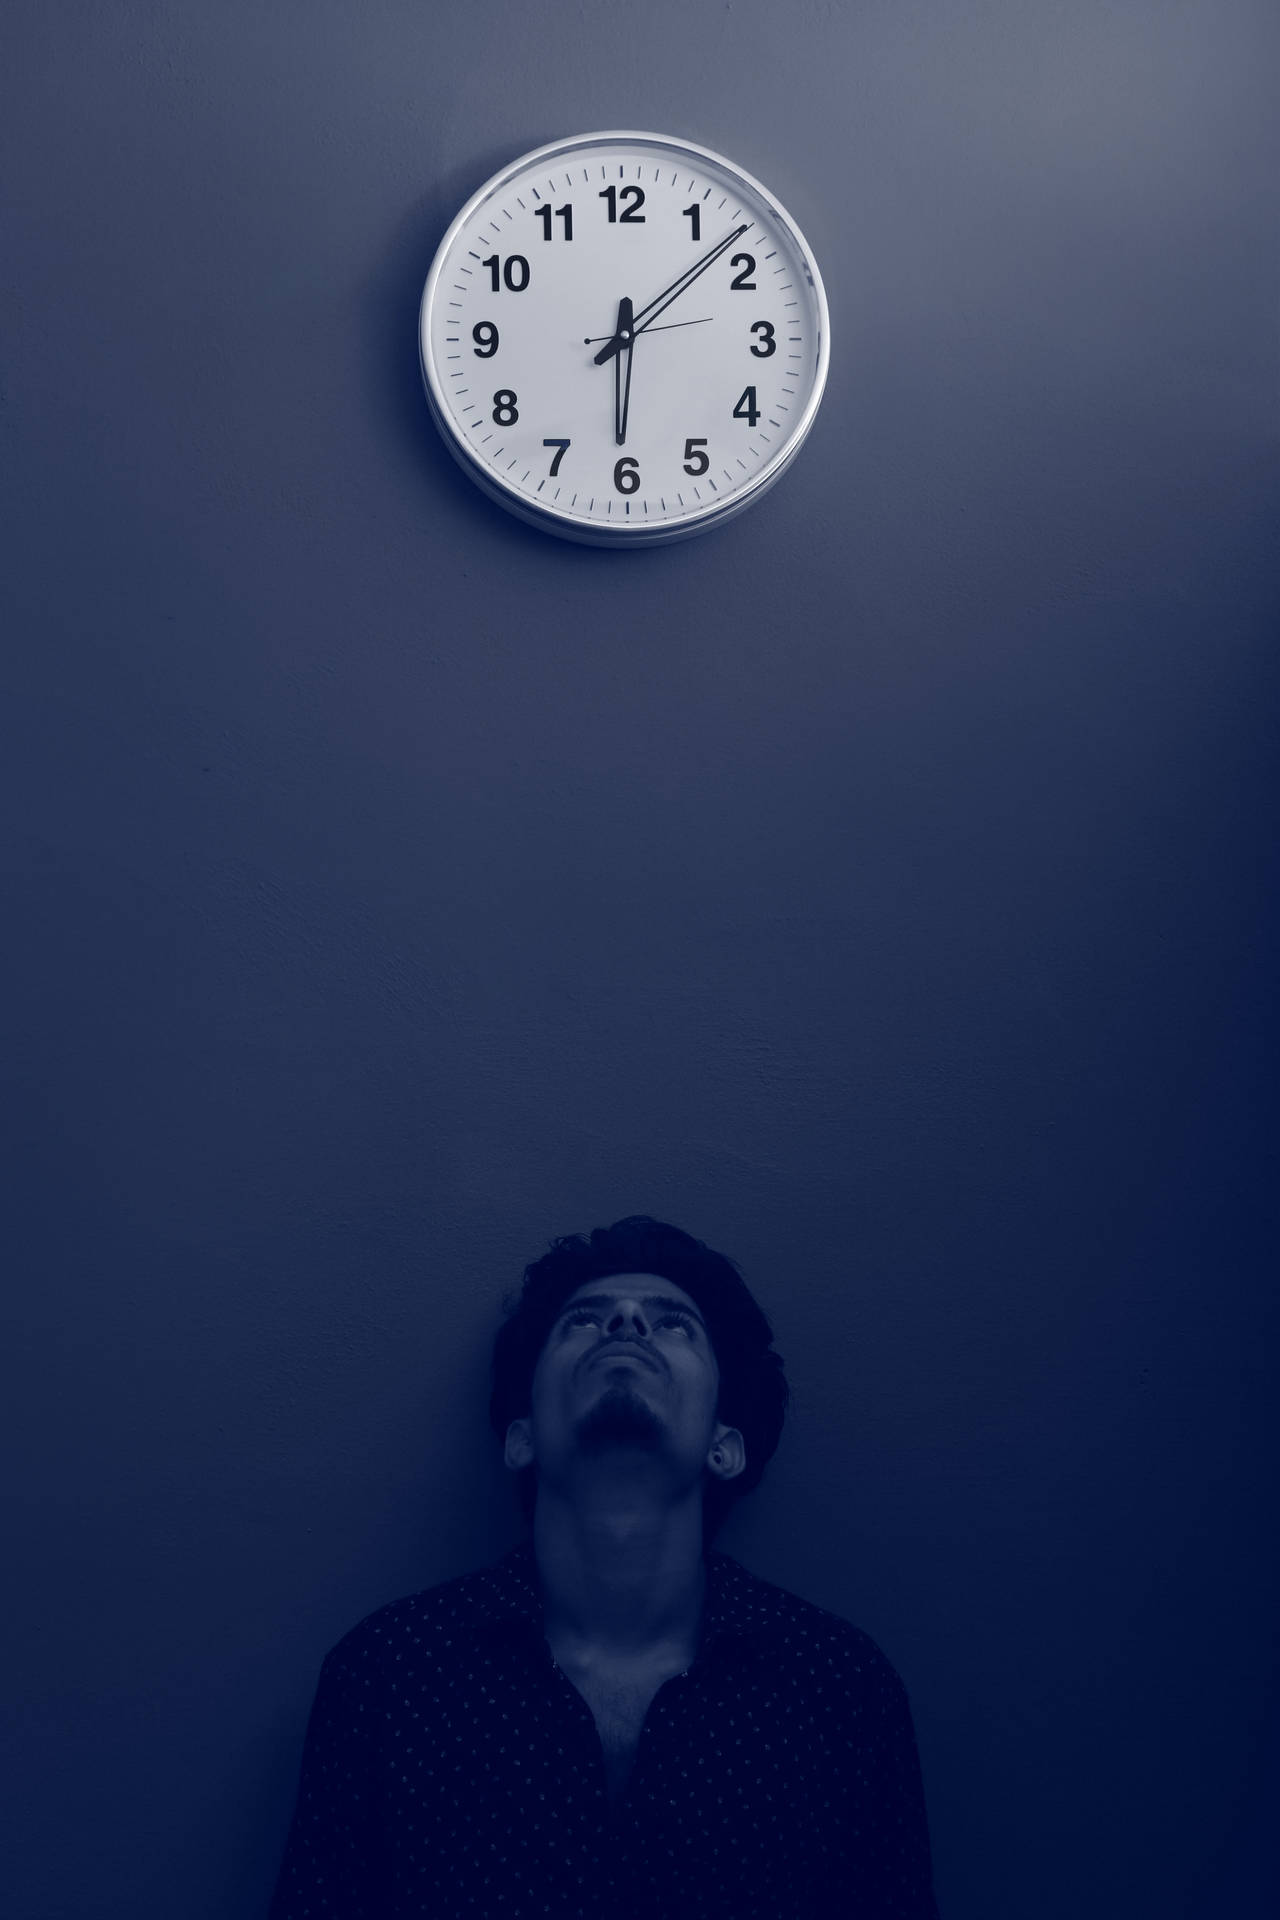 Clock With A Lonely Man